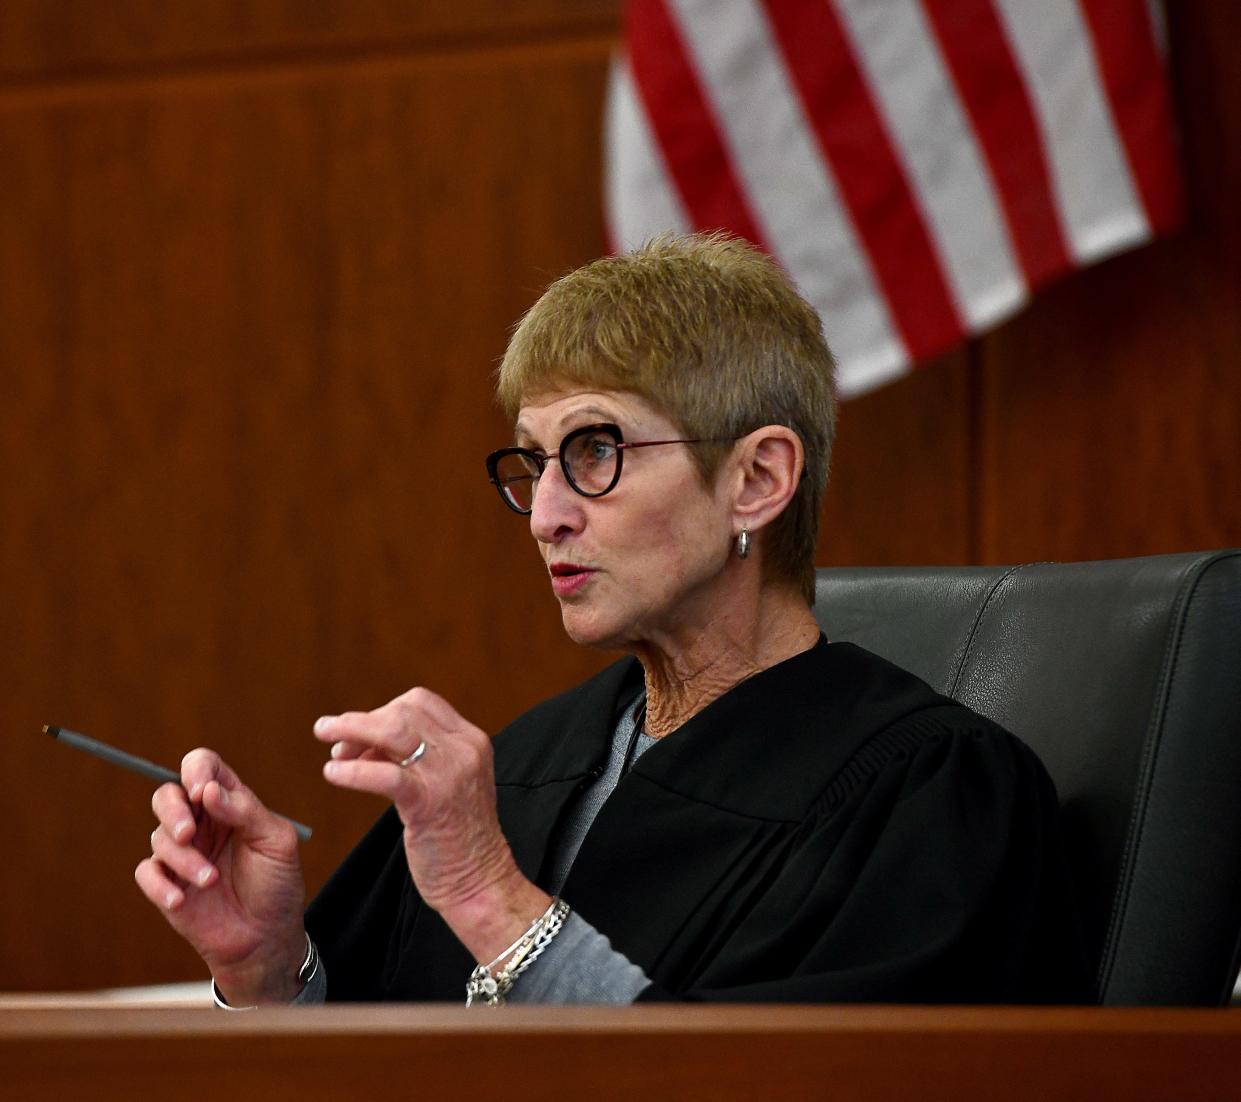 Judge Janet Kenton-Walker talks with lawyers during a hearing in the Mathew Locke case Thursday.